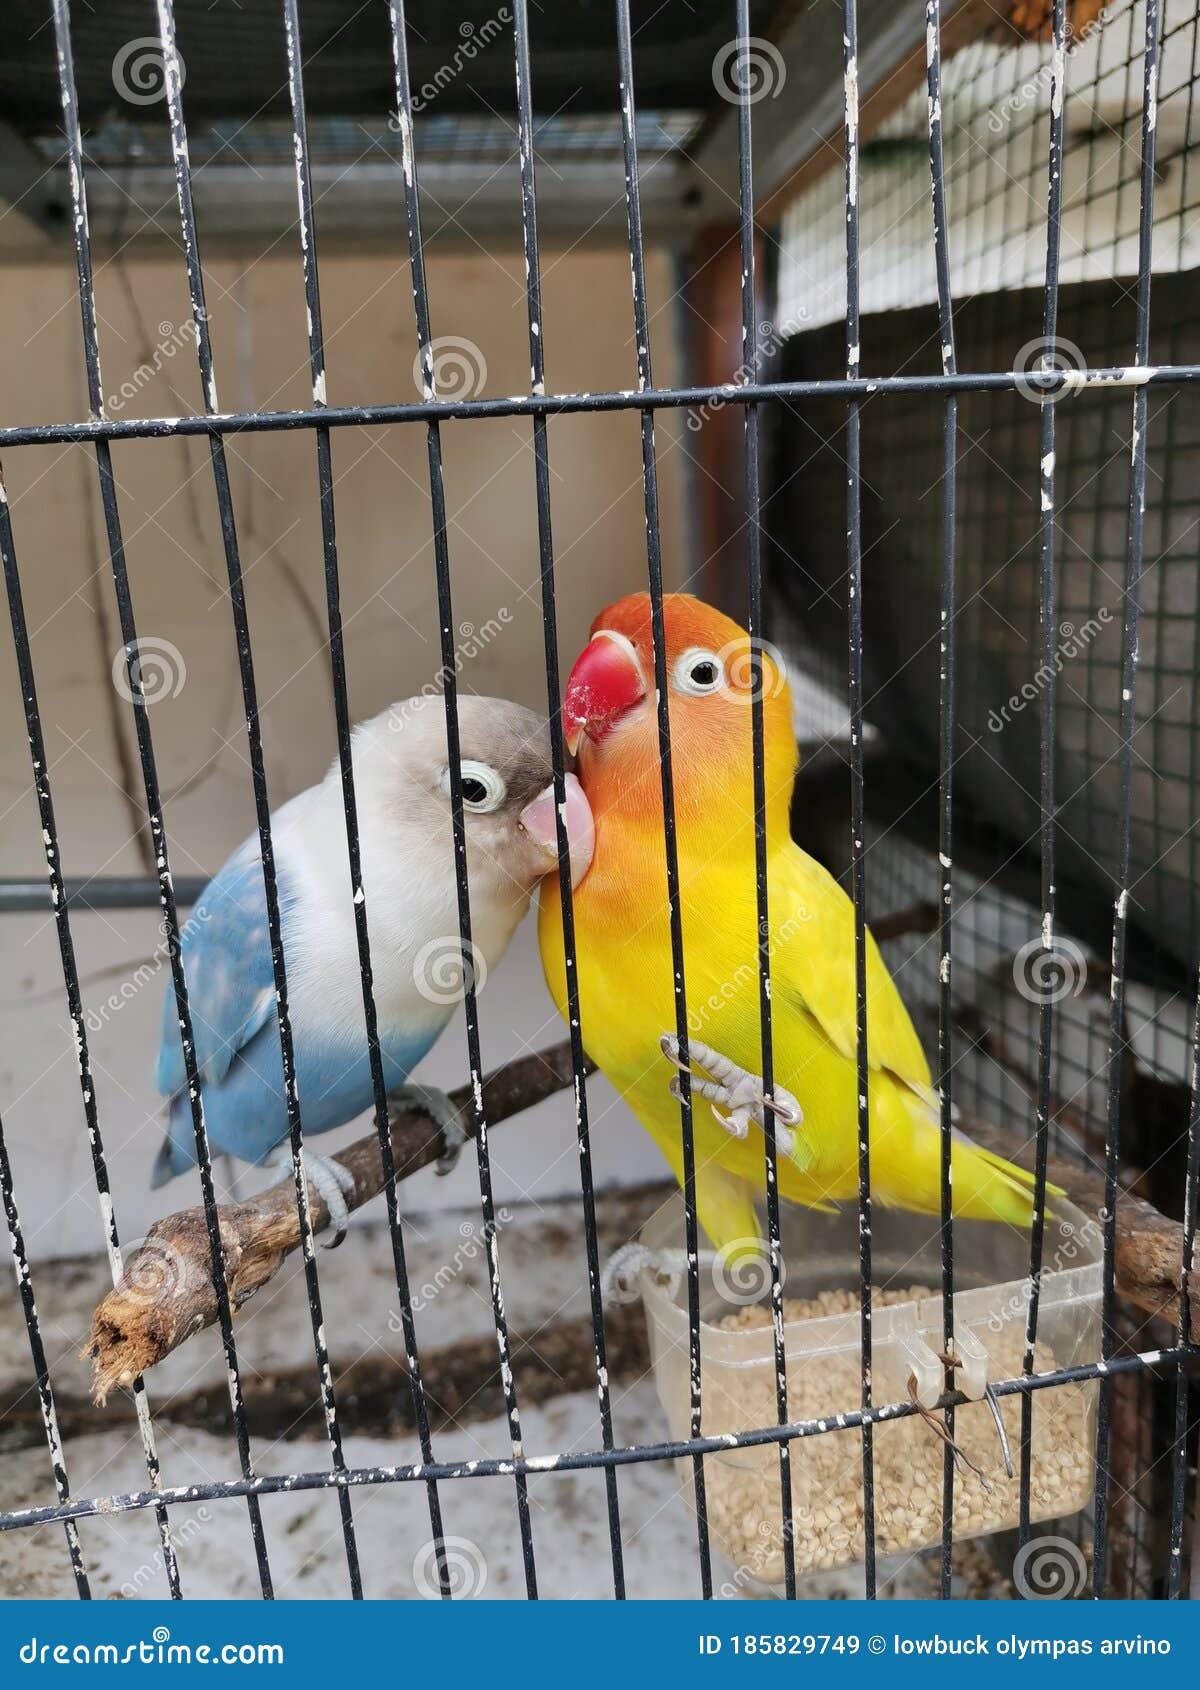 1,116 Love Birds Cage Photos - Free & Royalty-Free Stock Photos from Dreamstime